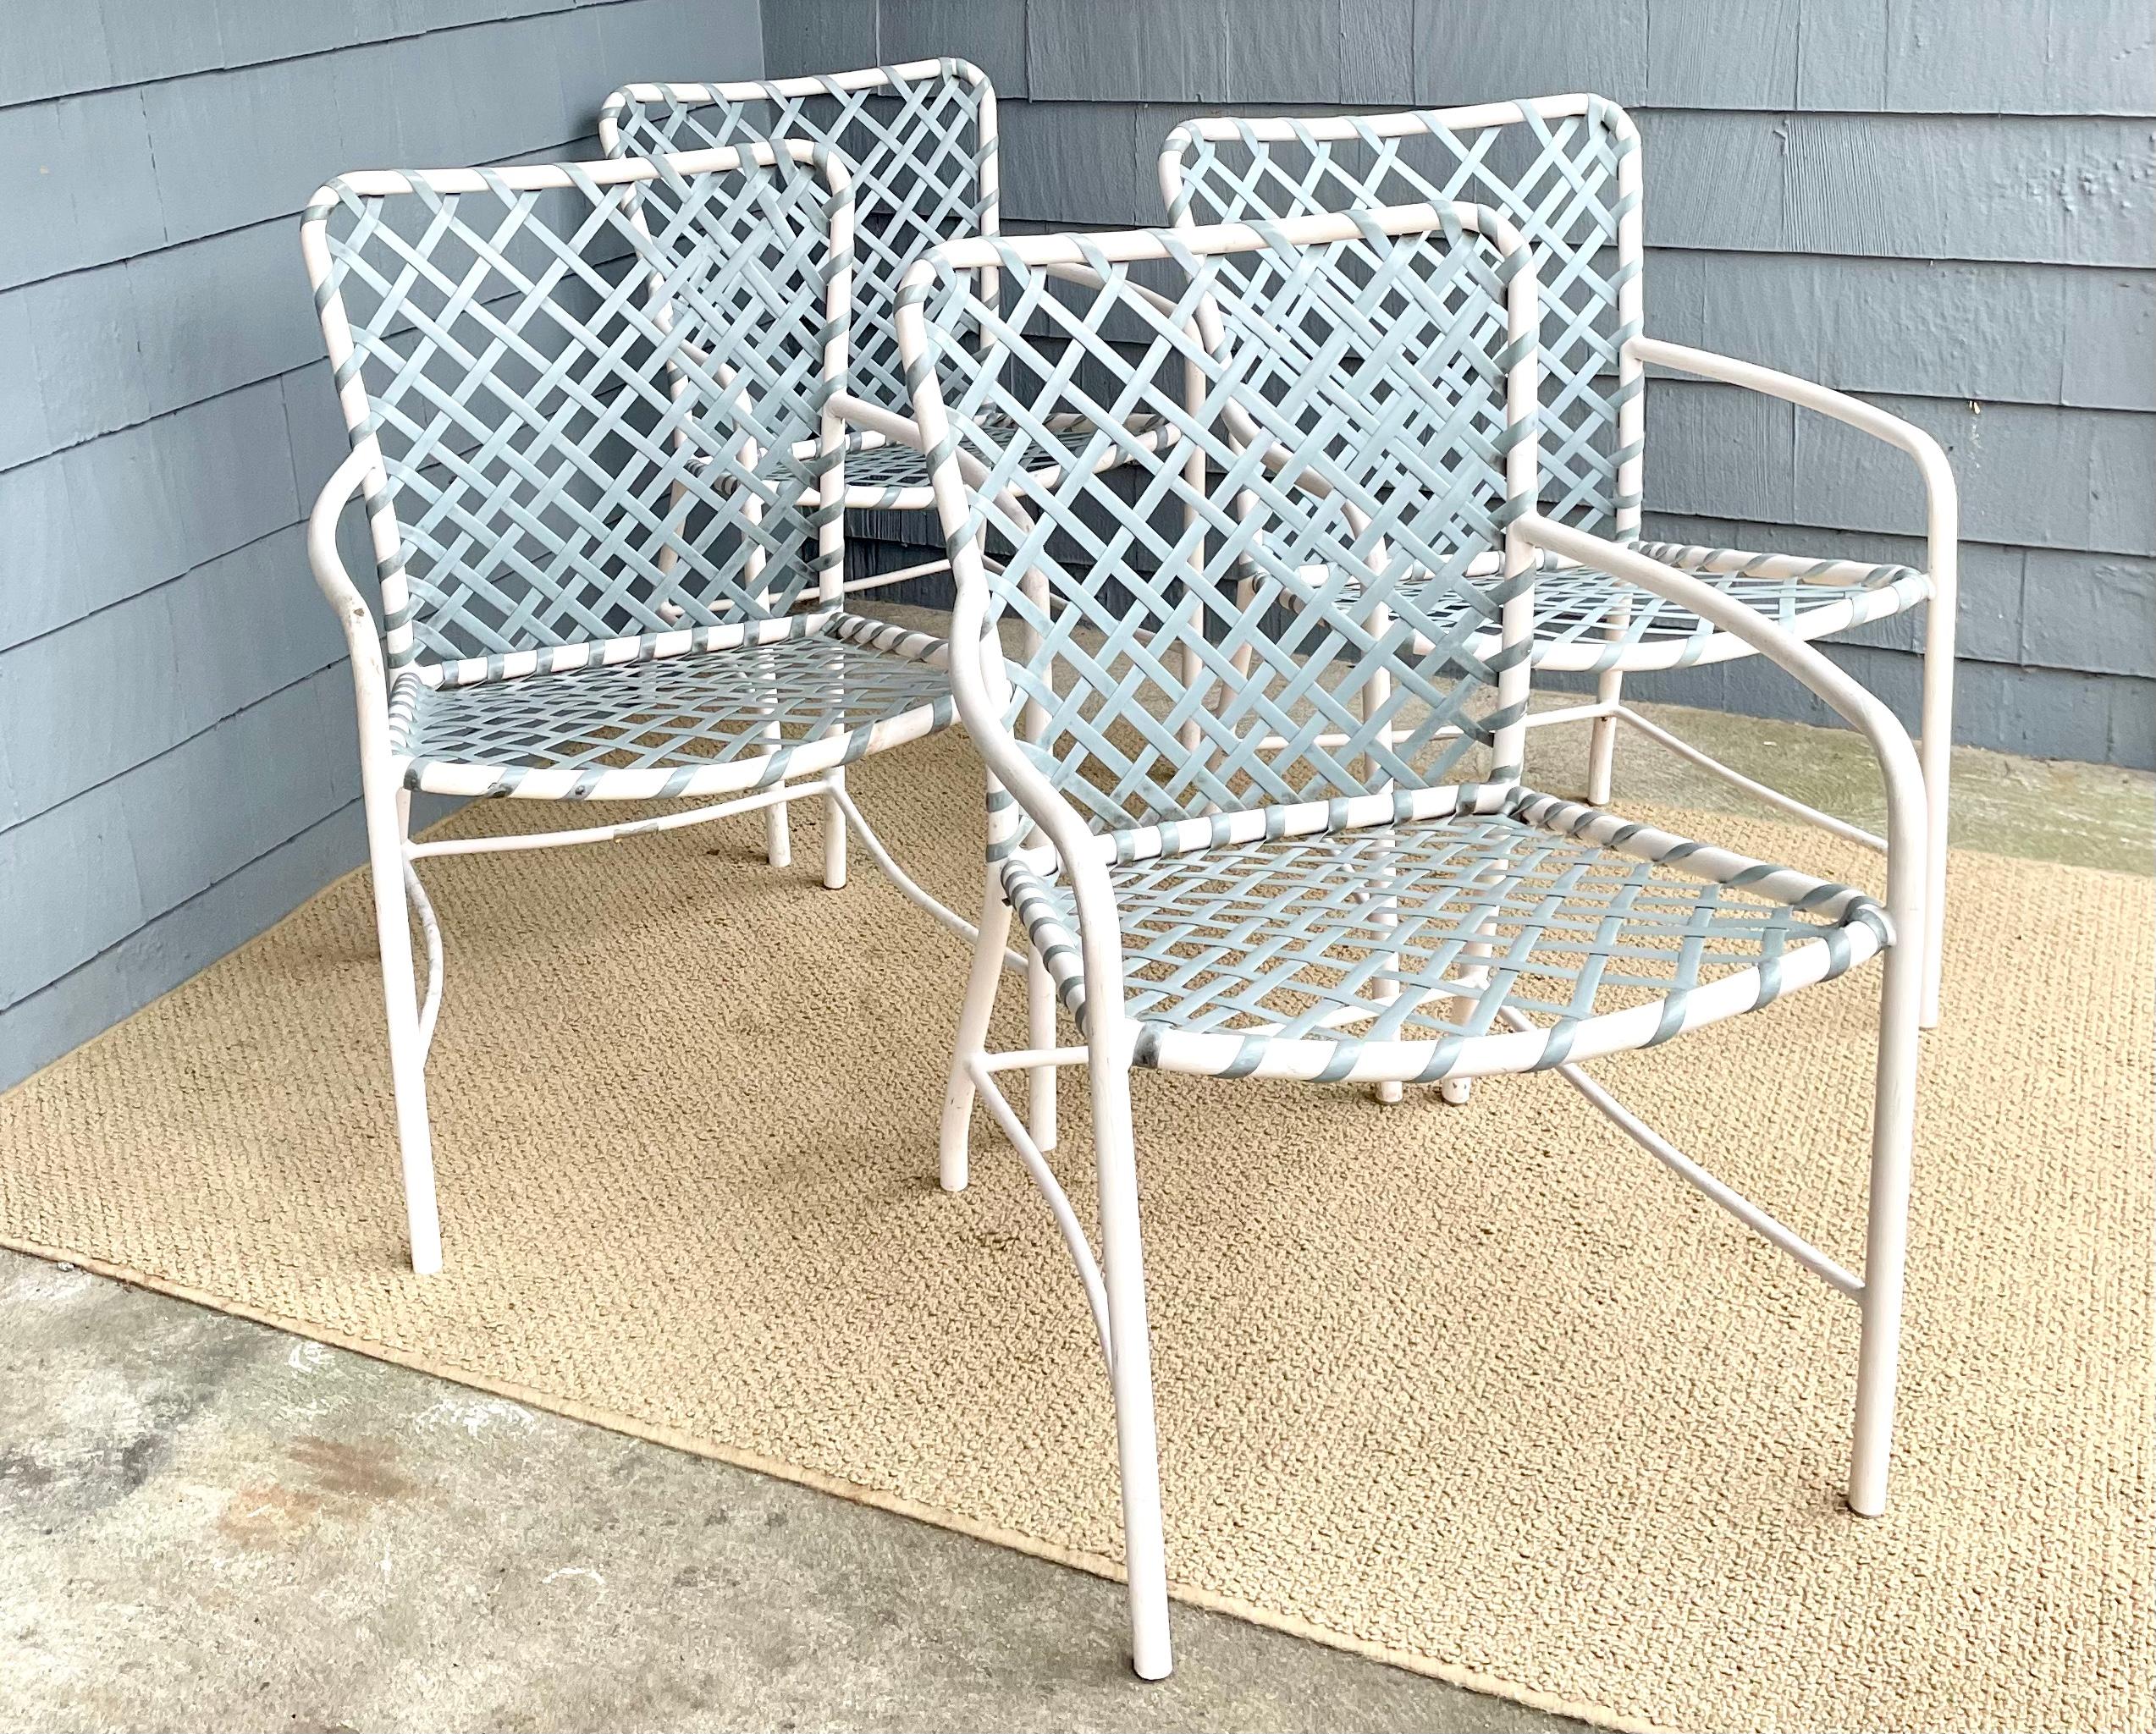 Plastic Vintage Brown Jordan Outdoor Patio Chairs Troptione Strapped 